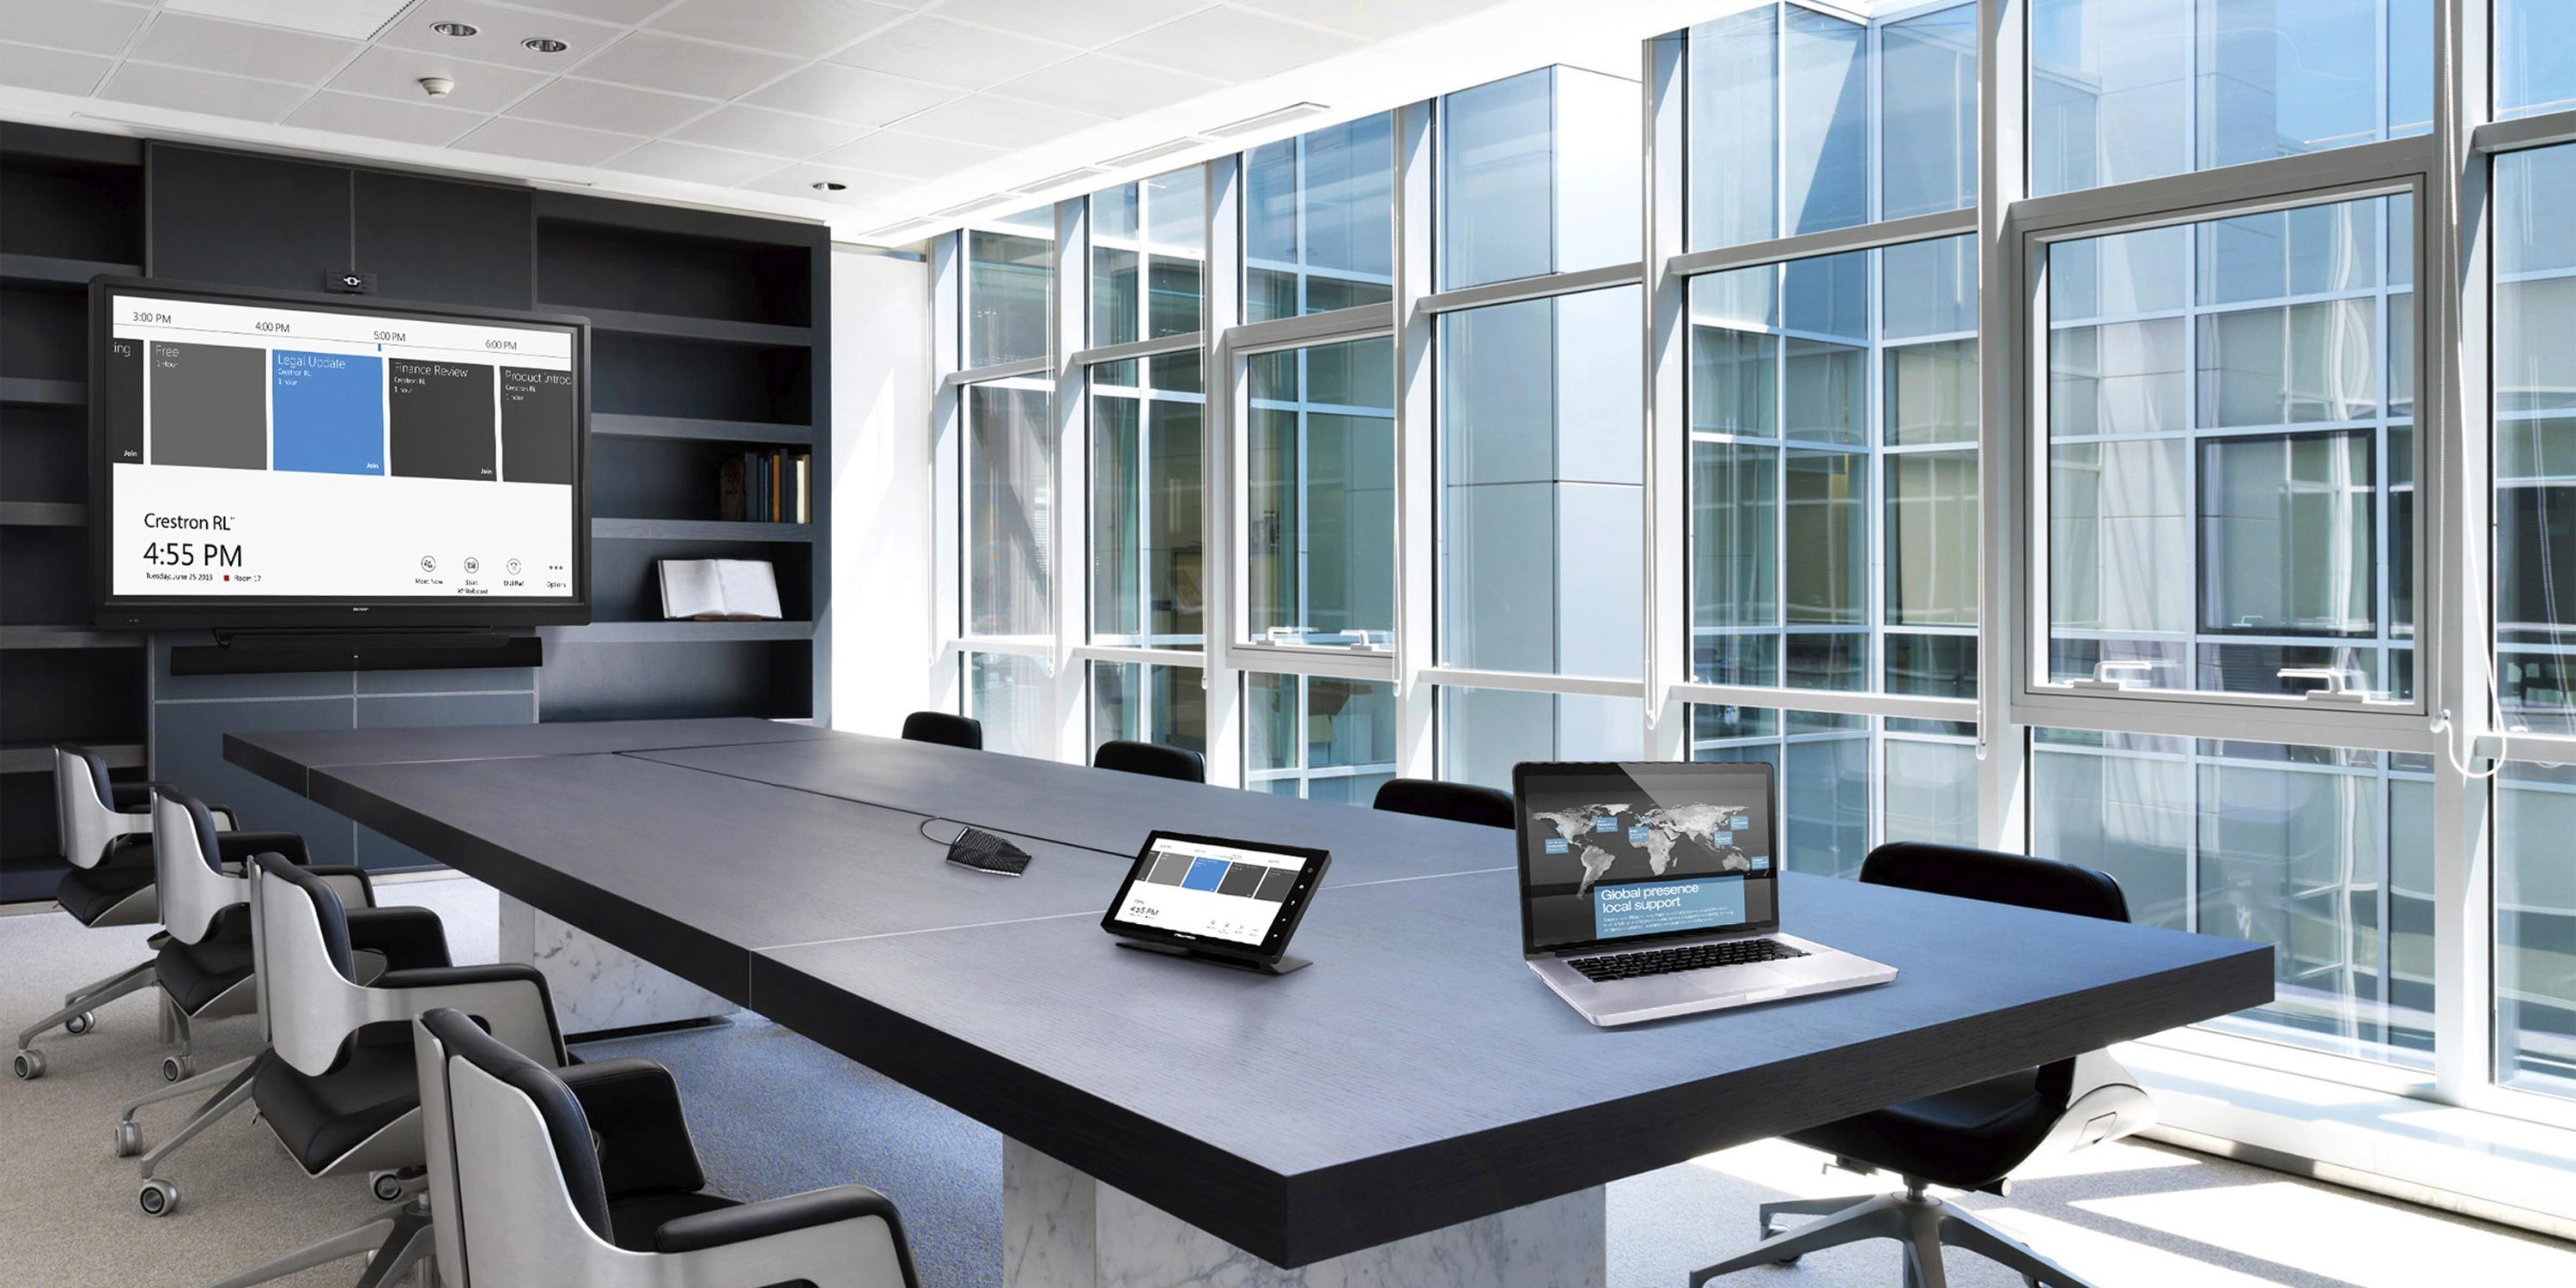 conference room with crestron technology